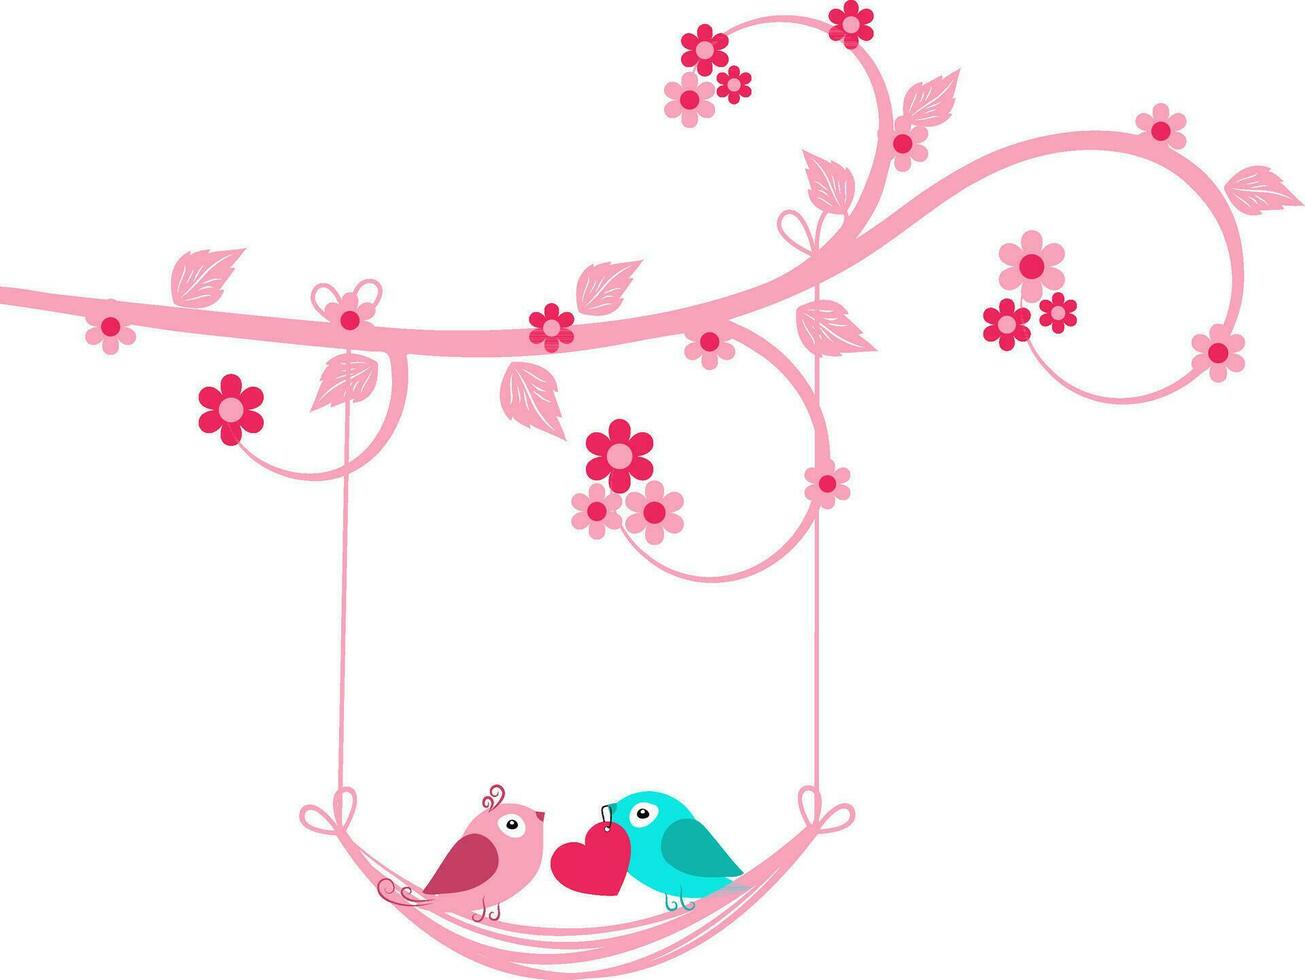 Cute love birds couple holding a pink heart and swinging on branch of tree for Happy Valentine's Day celebration. vector